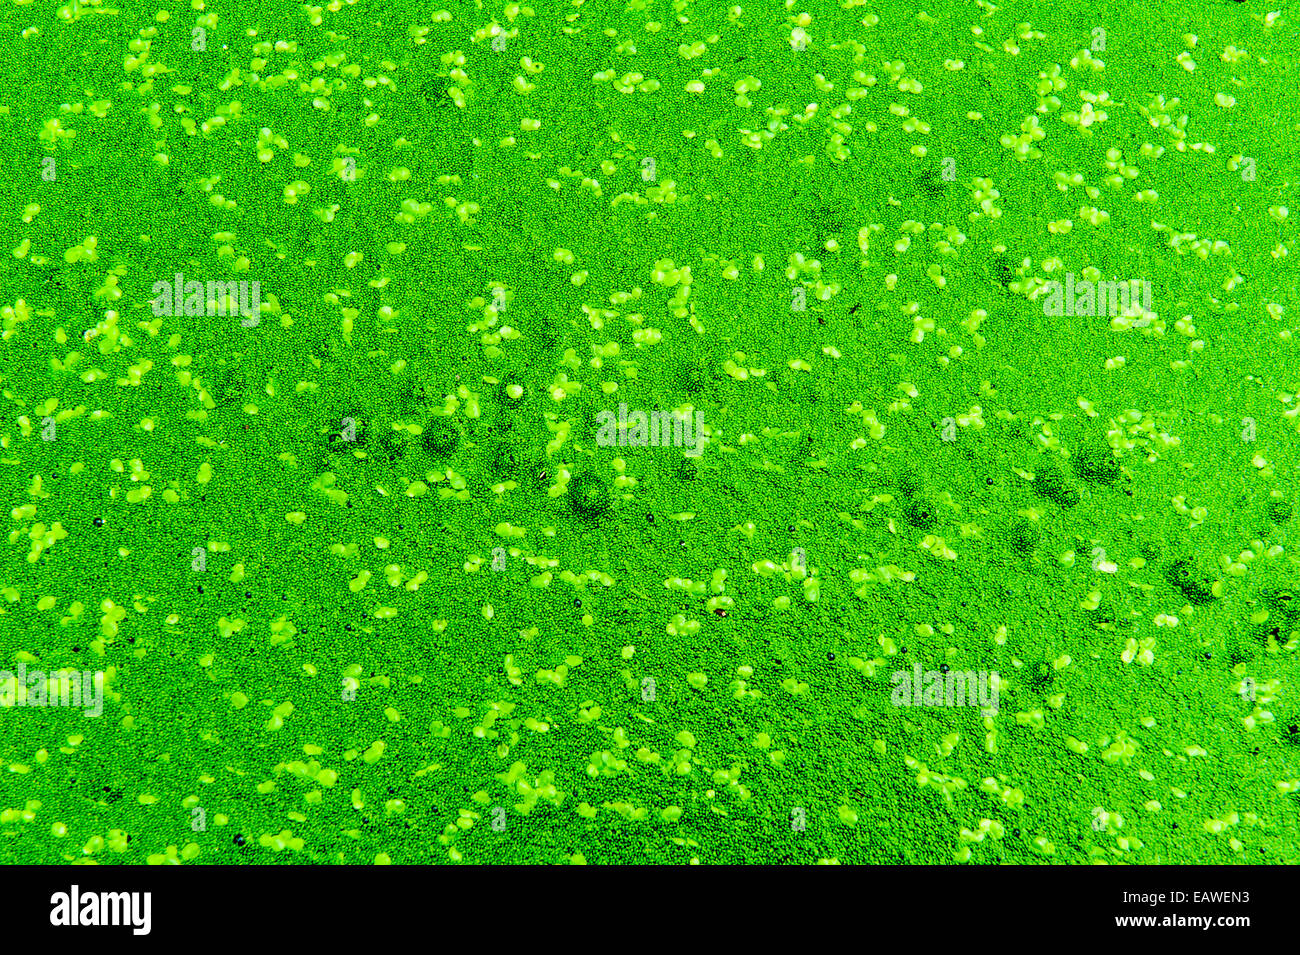 Aquatic plants and algae cover the water surface of a garden pond. Stock Photo